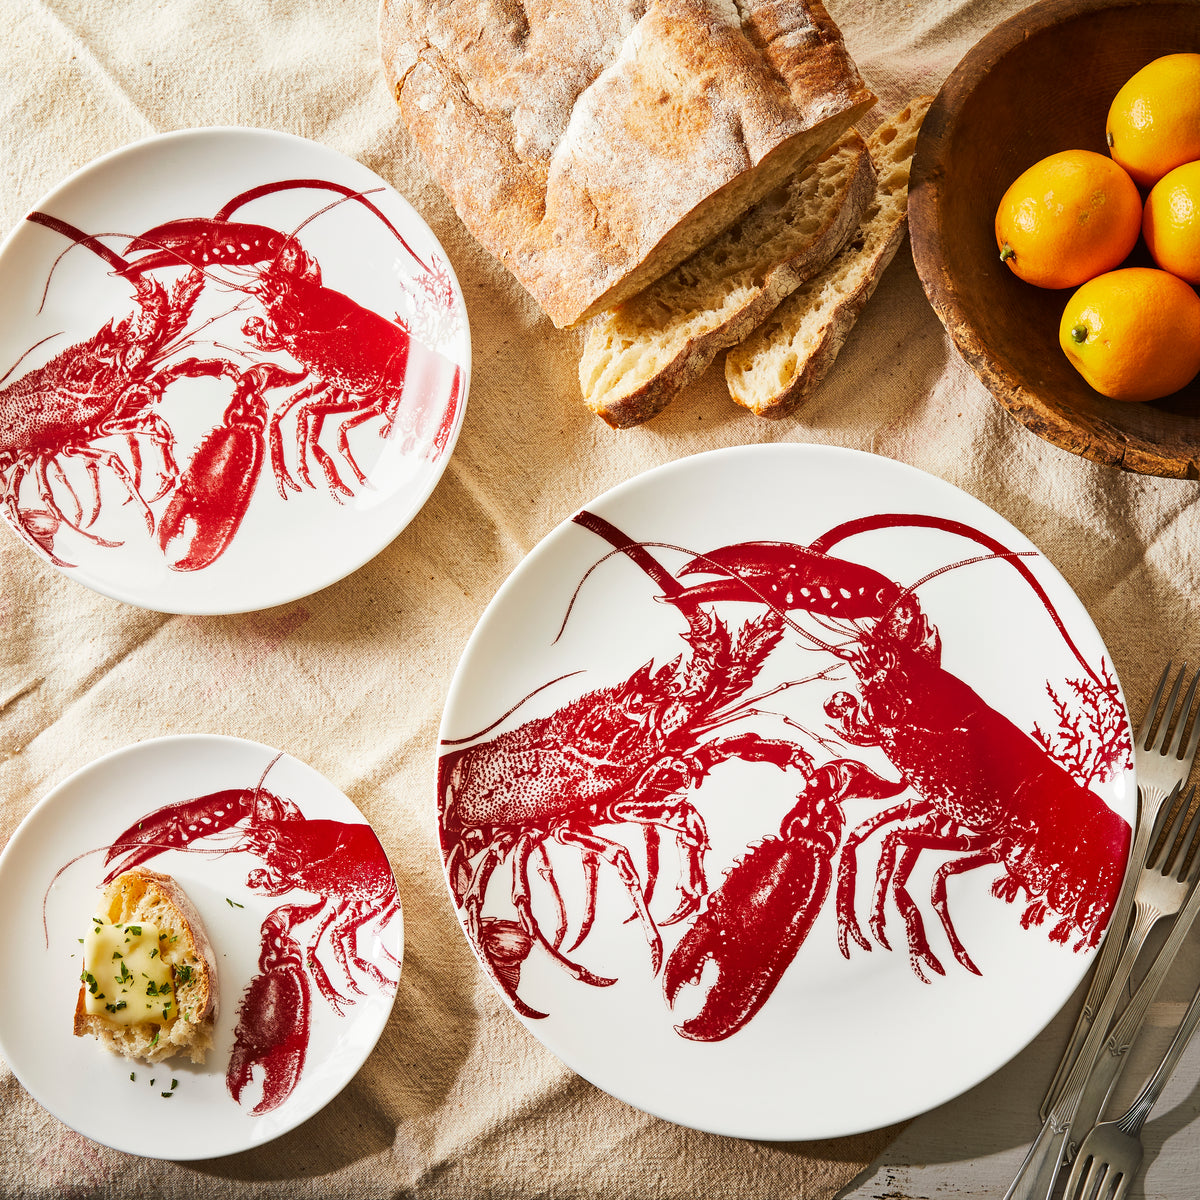 Three white porcelain plates featuring red lobster illustrations from the Beach Wedding Bundle by Caskata are arranged on a table with bread, a wooden bowl of oranges, and a partial view of silverware—a perfect setting for beach lovers.